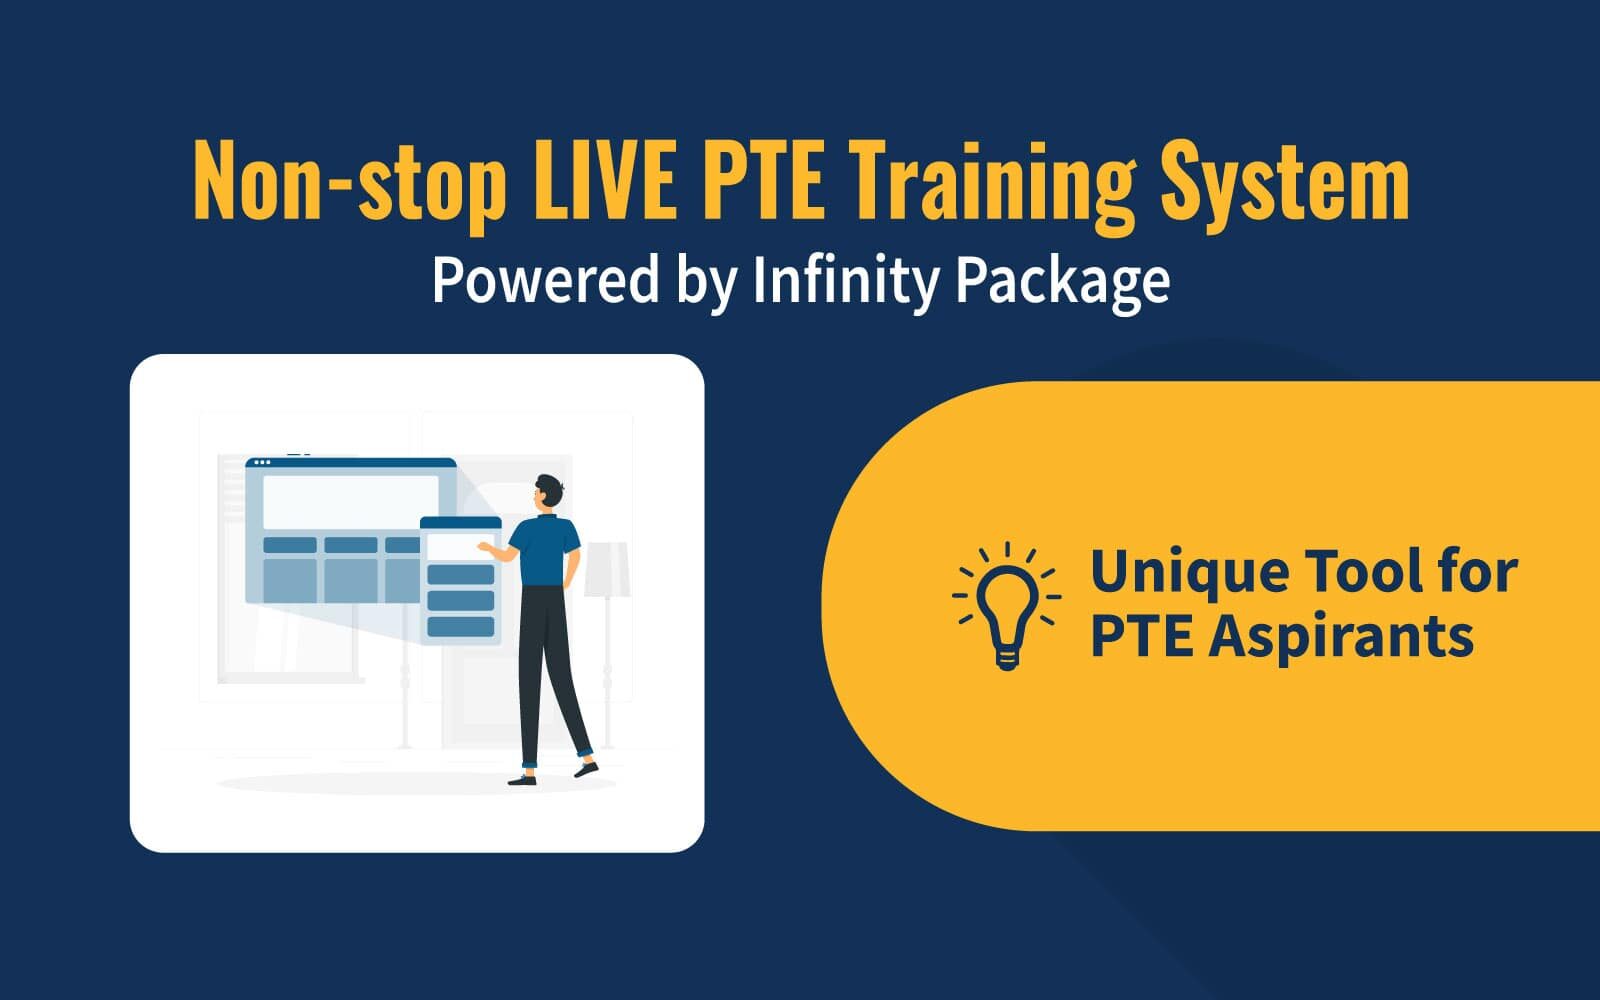 Non-stop LIVE PTE Training System Powered by Infinity Package image